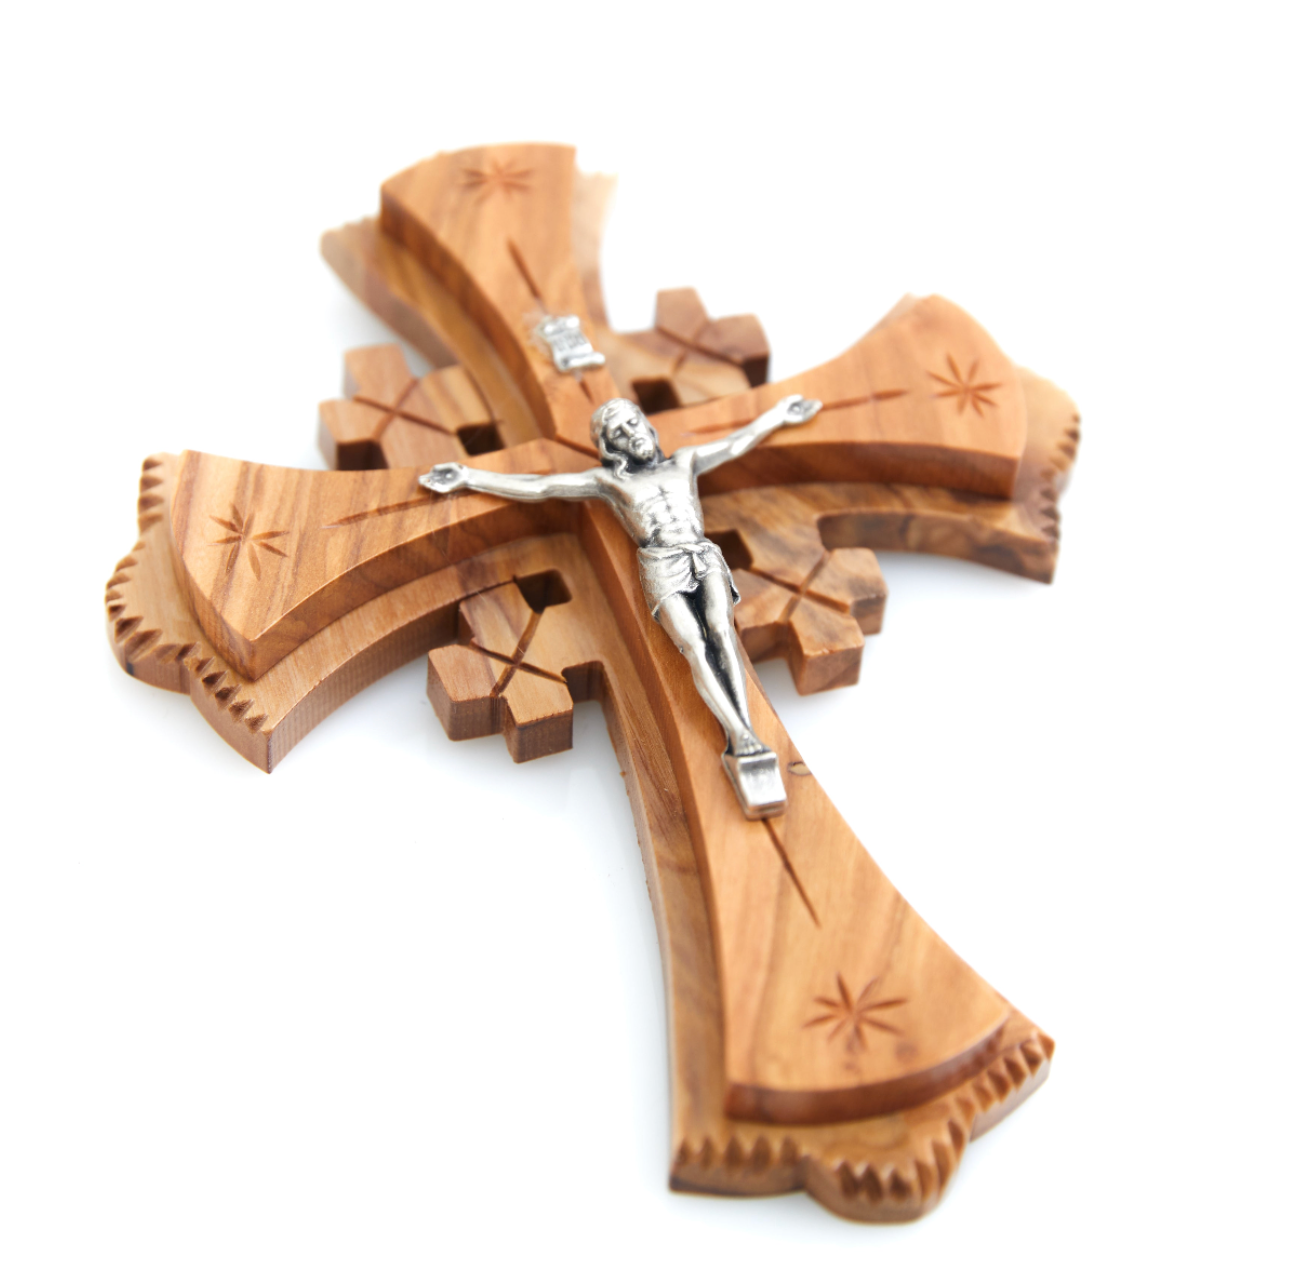 Wooden Crucifix, Wall Hanging Cross with Silver Plated Jesus Christ Corpus, INRI, Jerusalem Engraved on Back, Hand Made 